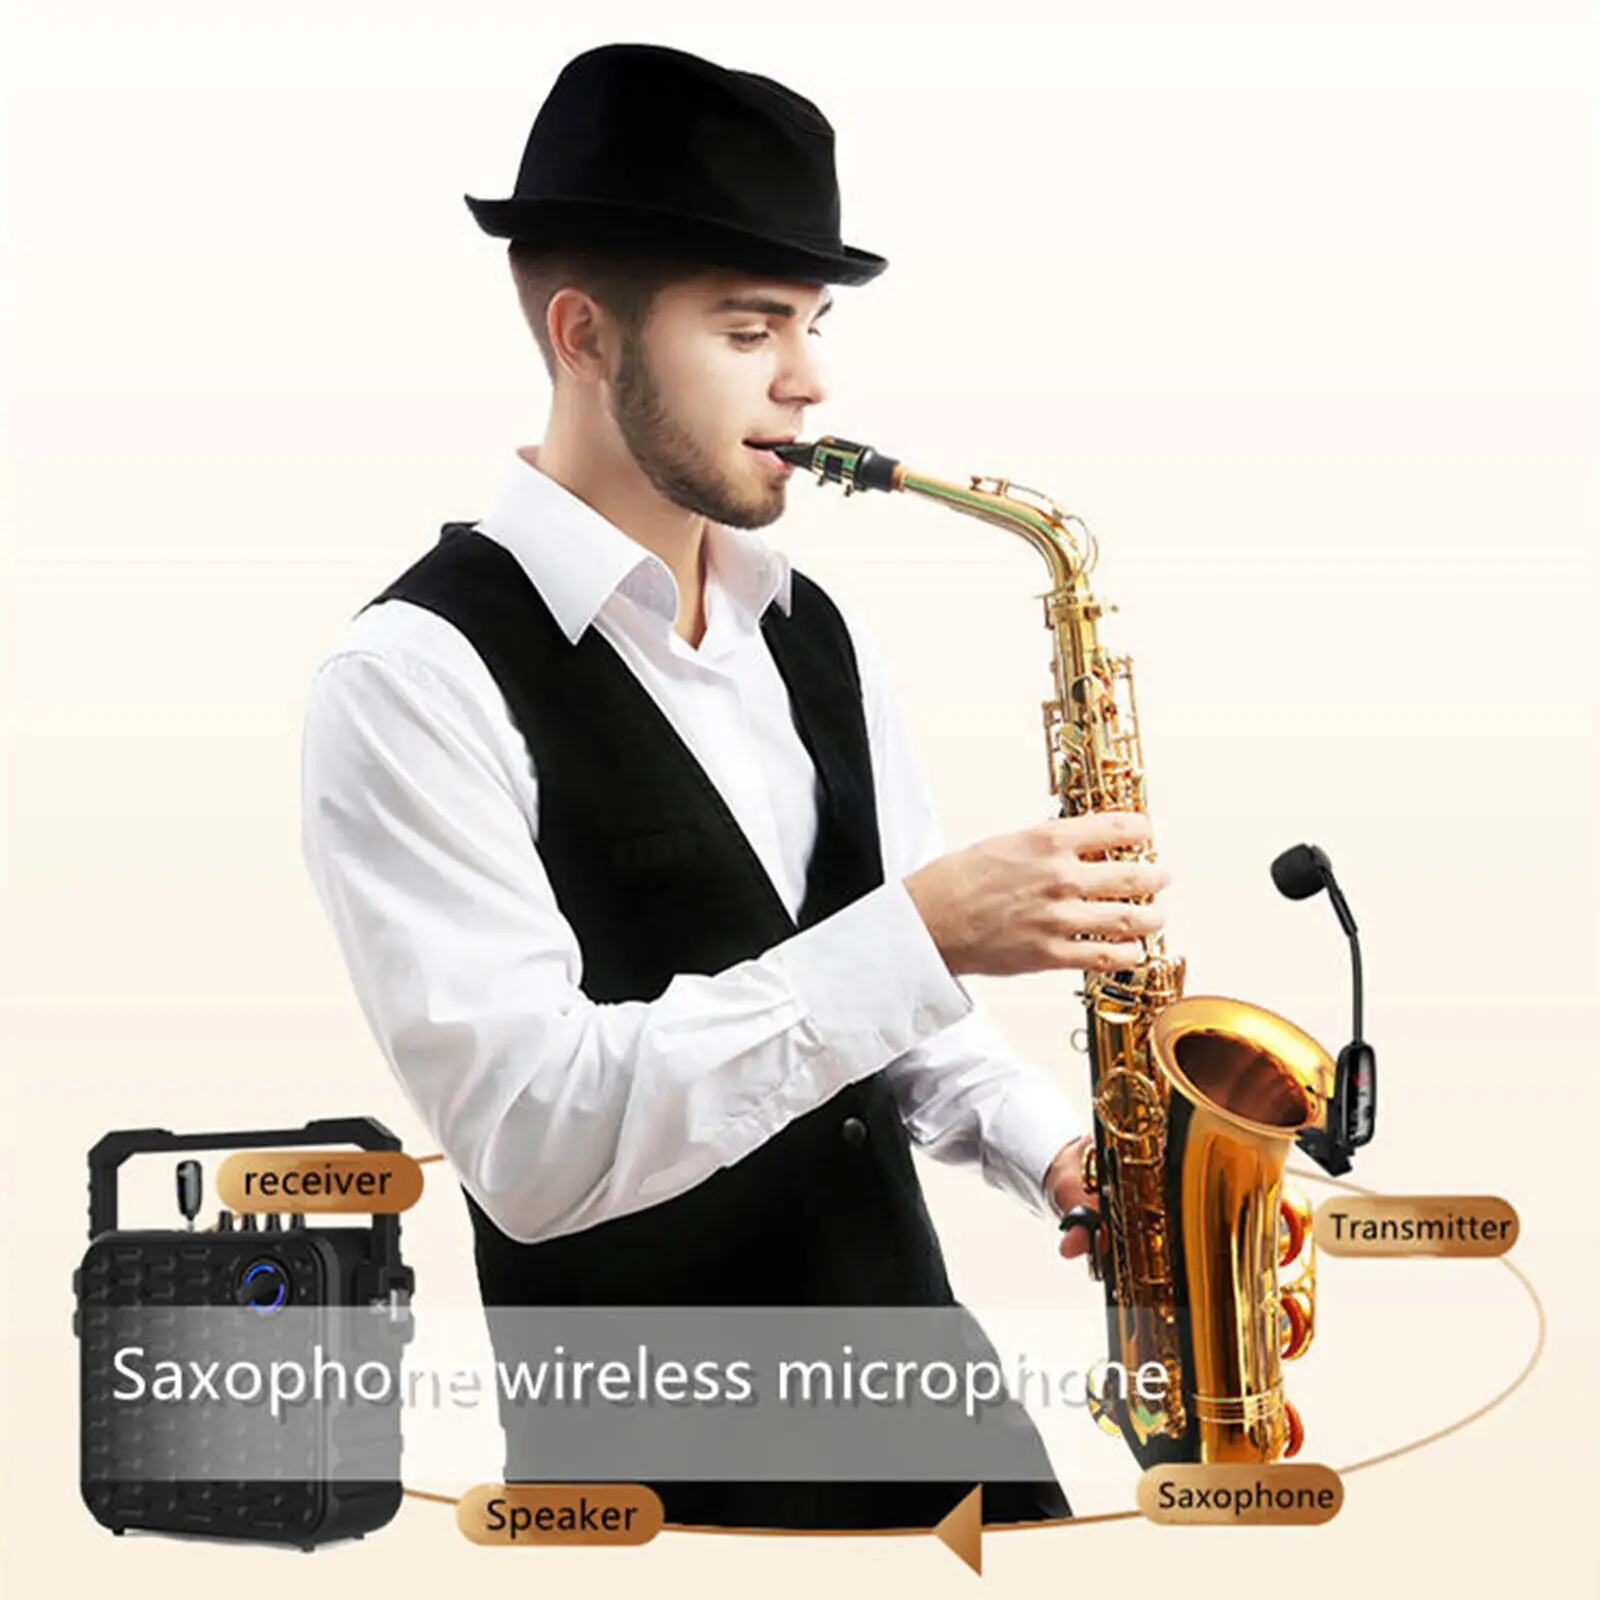 

Uhf Wireless Saxophone Microphone System Clip On Musical Instruments for Saxophone Trumpet Sax Wireless Receiver Transmitter